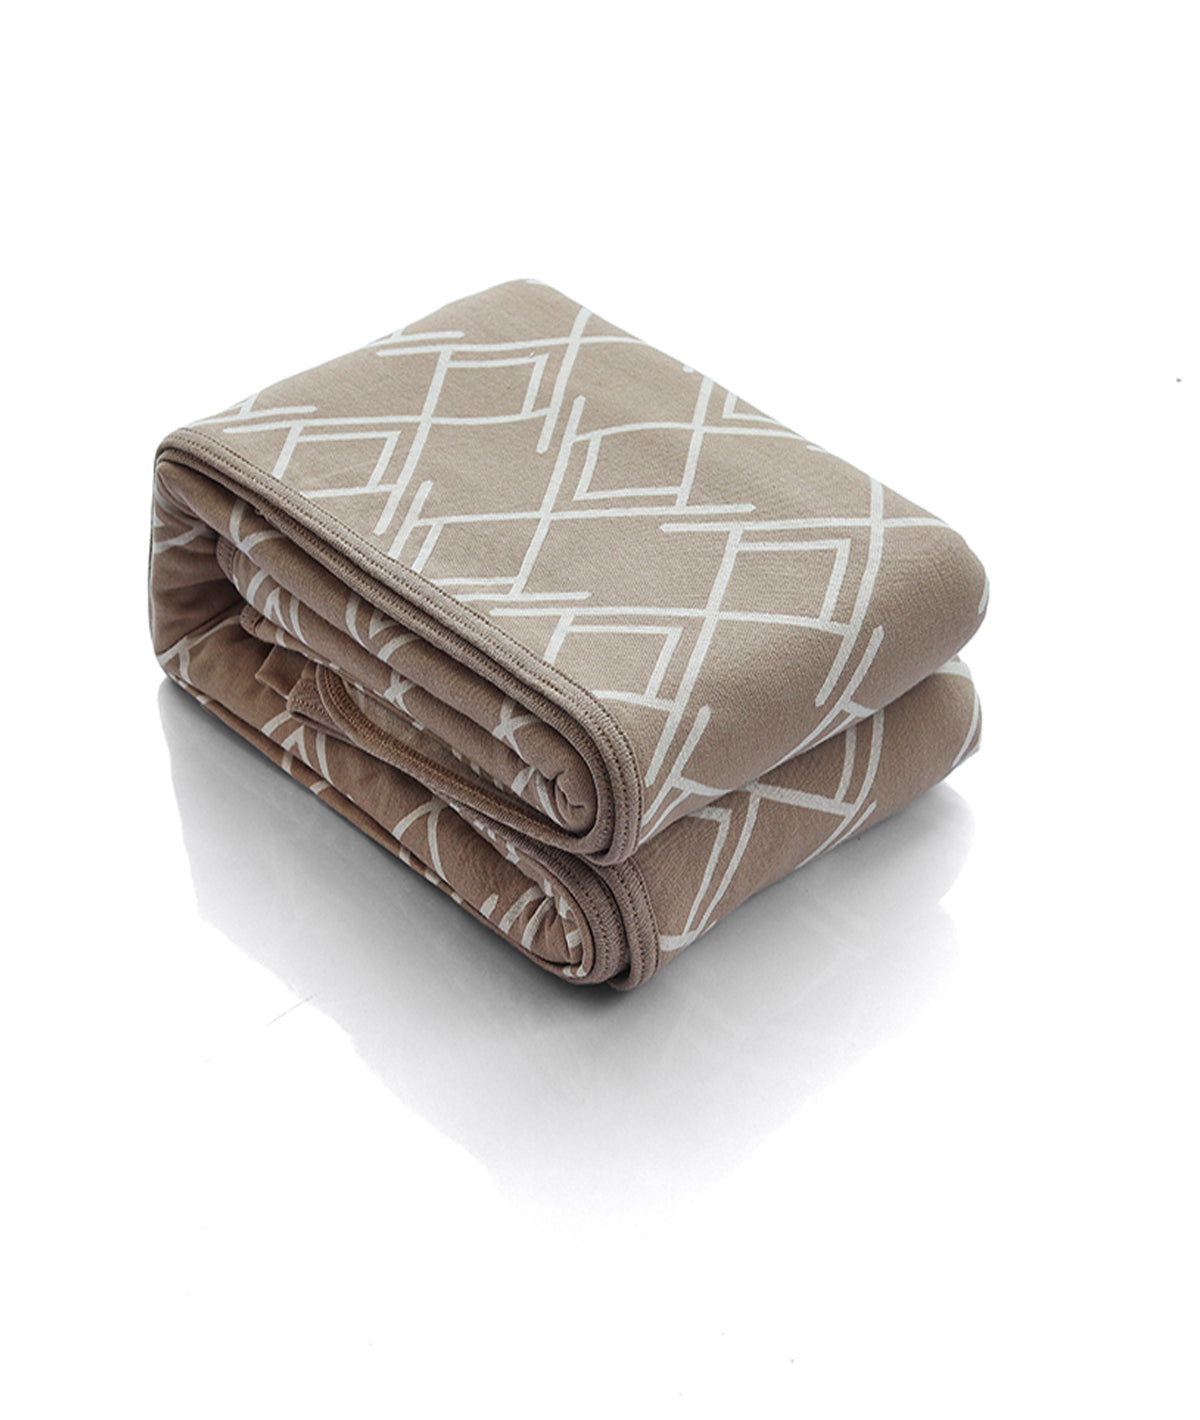 Gianna Cotton Knitted Double Bed AC Blanket / Dohar For Round The Year Use (Stone & Natural)